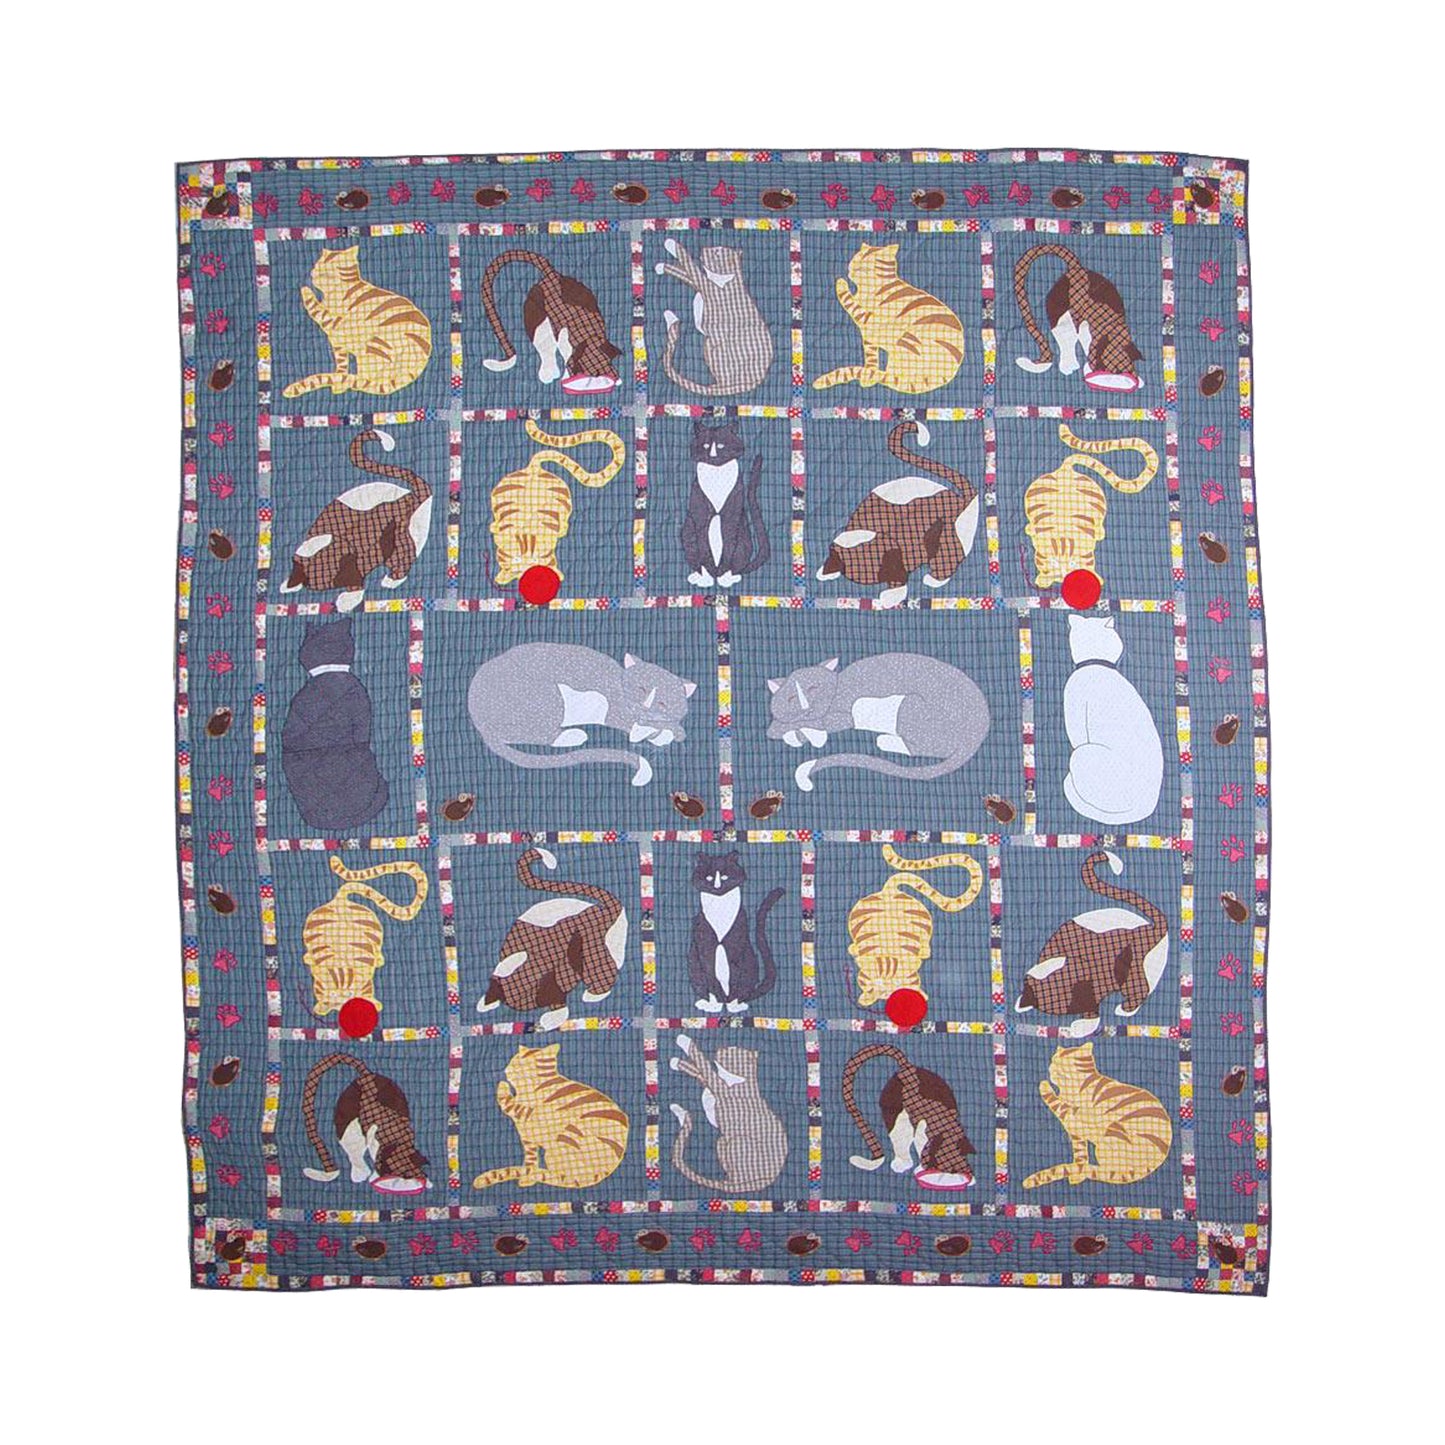 Kitty and Meow Quilt, Hand cut and Appliqued cotton fabric motifs.